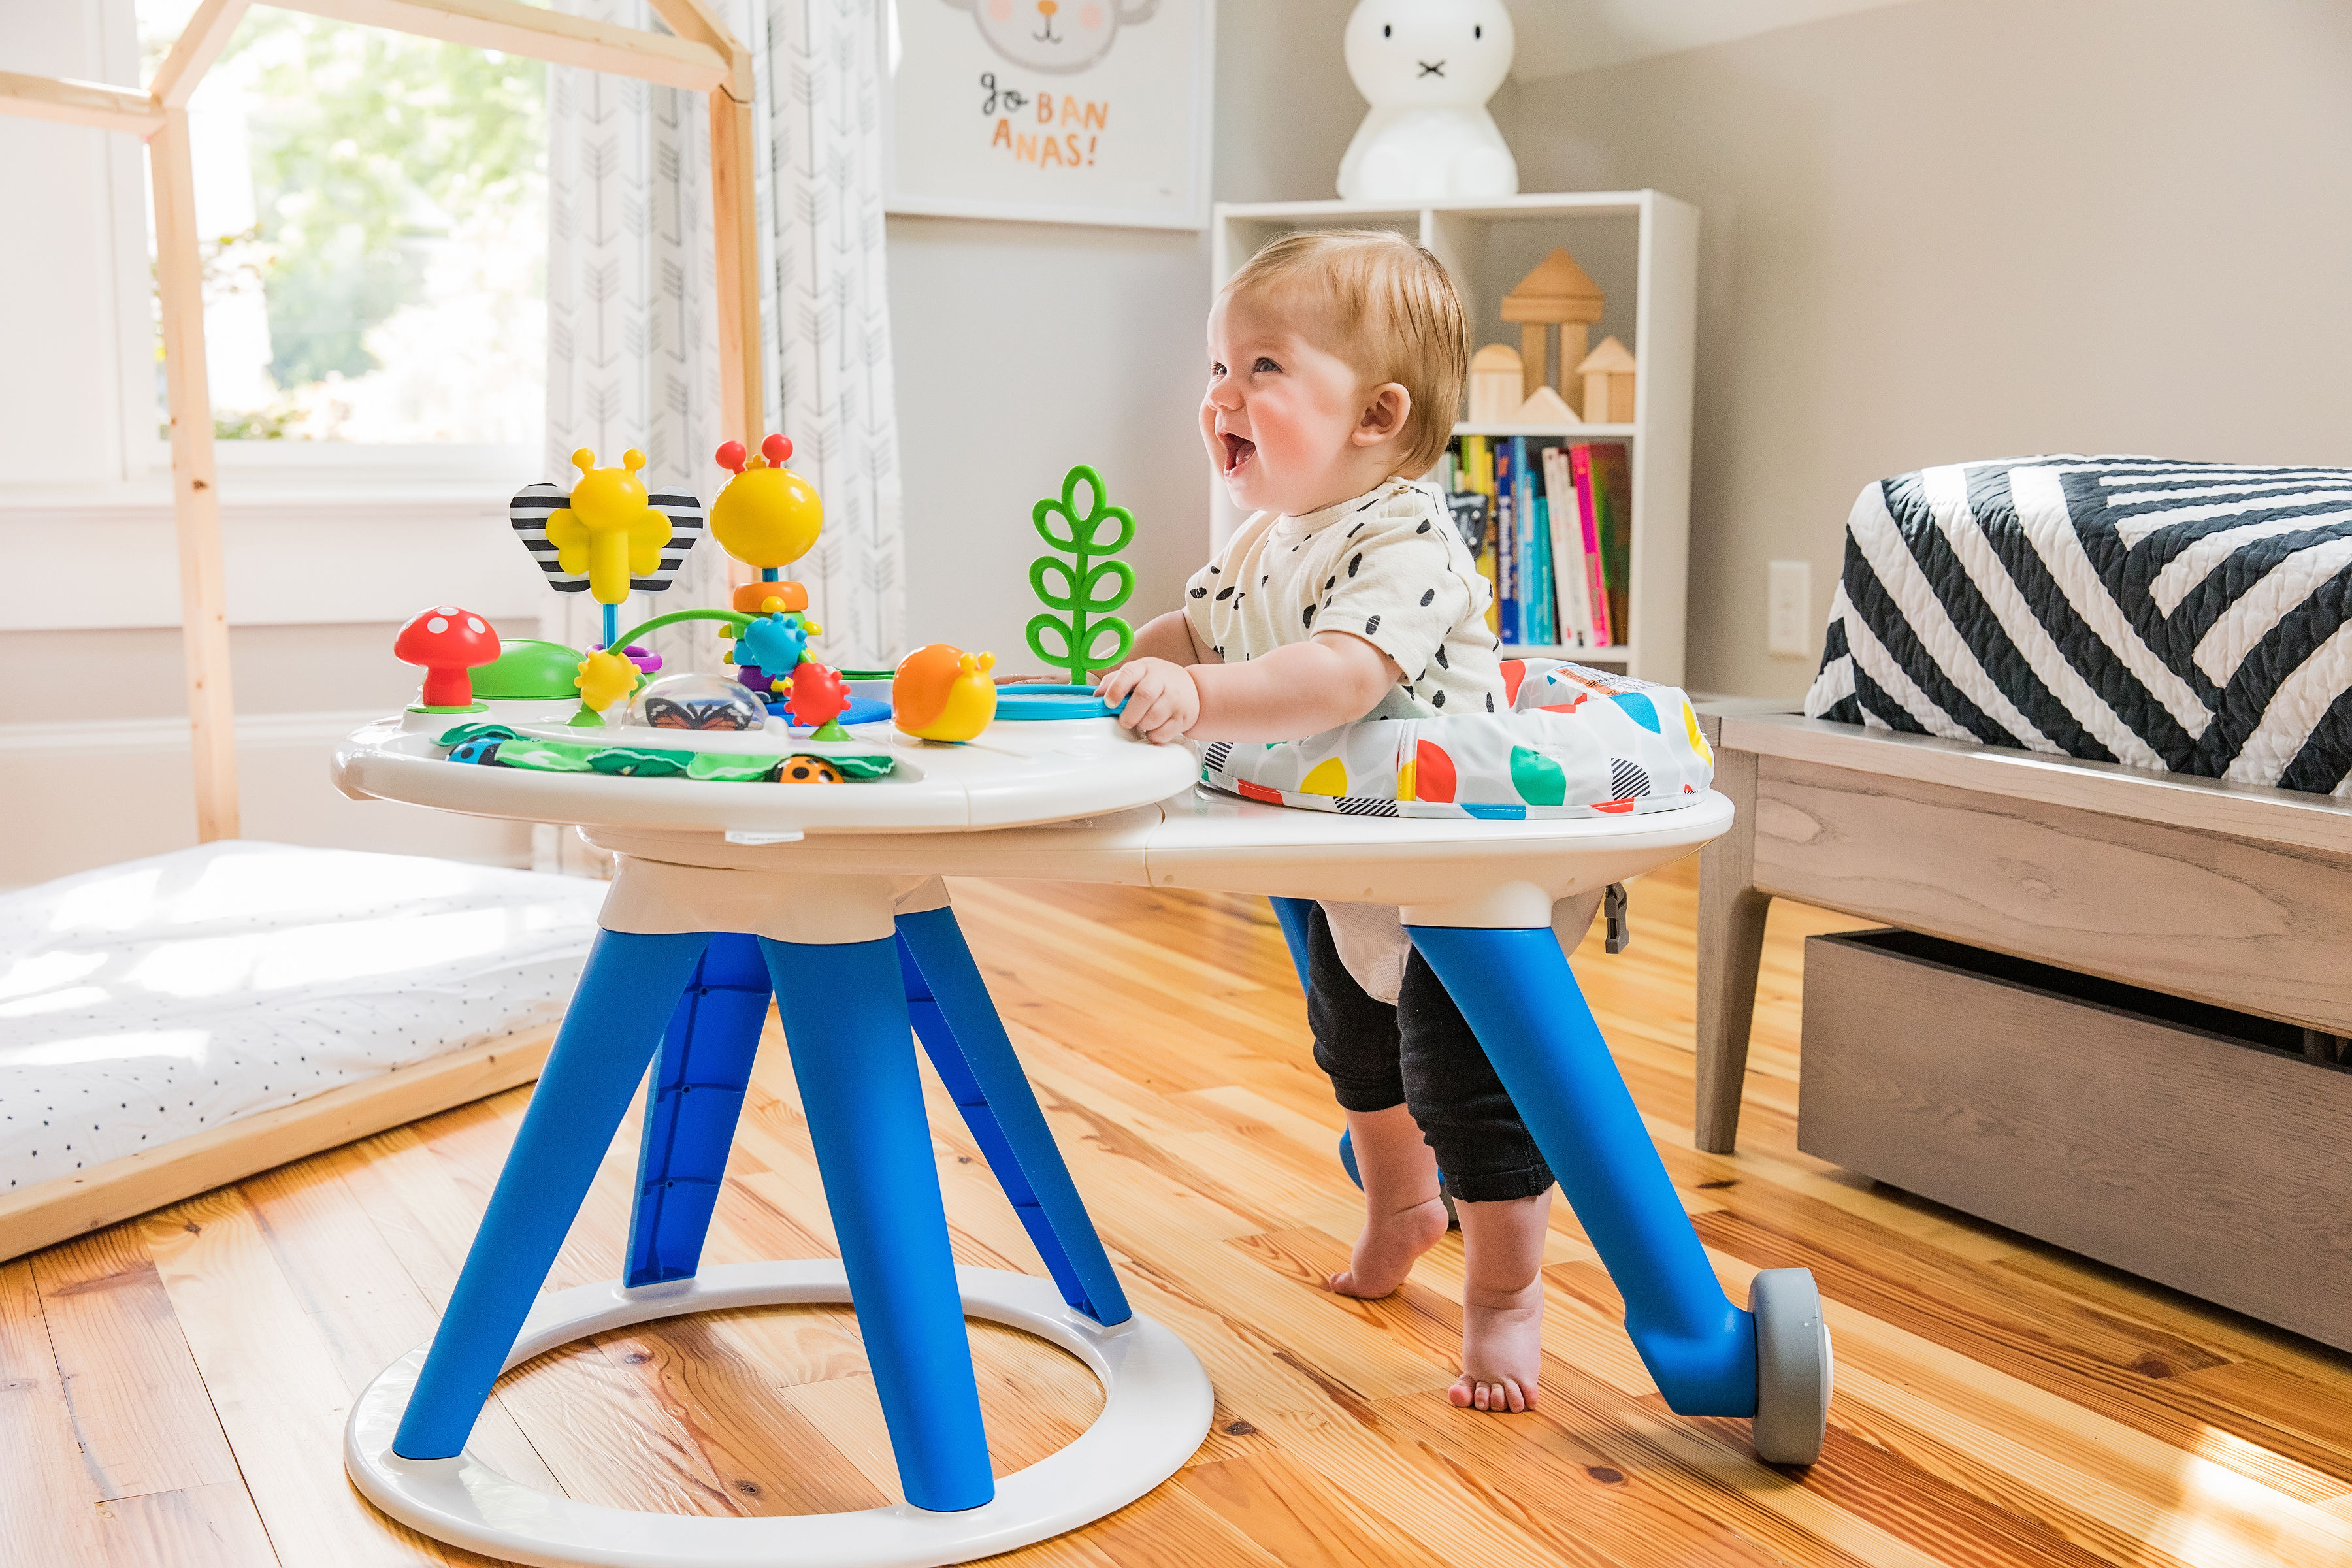 “Designed to cultivate curiosity as baby grows, the activity center helps mom introduce baby to the sights, sounds, and textures of nature and its unique 4-in-1, 360° design promotes movement, occupational dexterity, and cognitive development as baby grows,” said Franco Lodato, SVP global design and innovation at Kids2. 